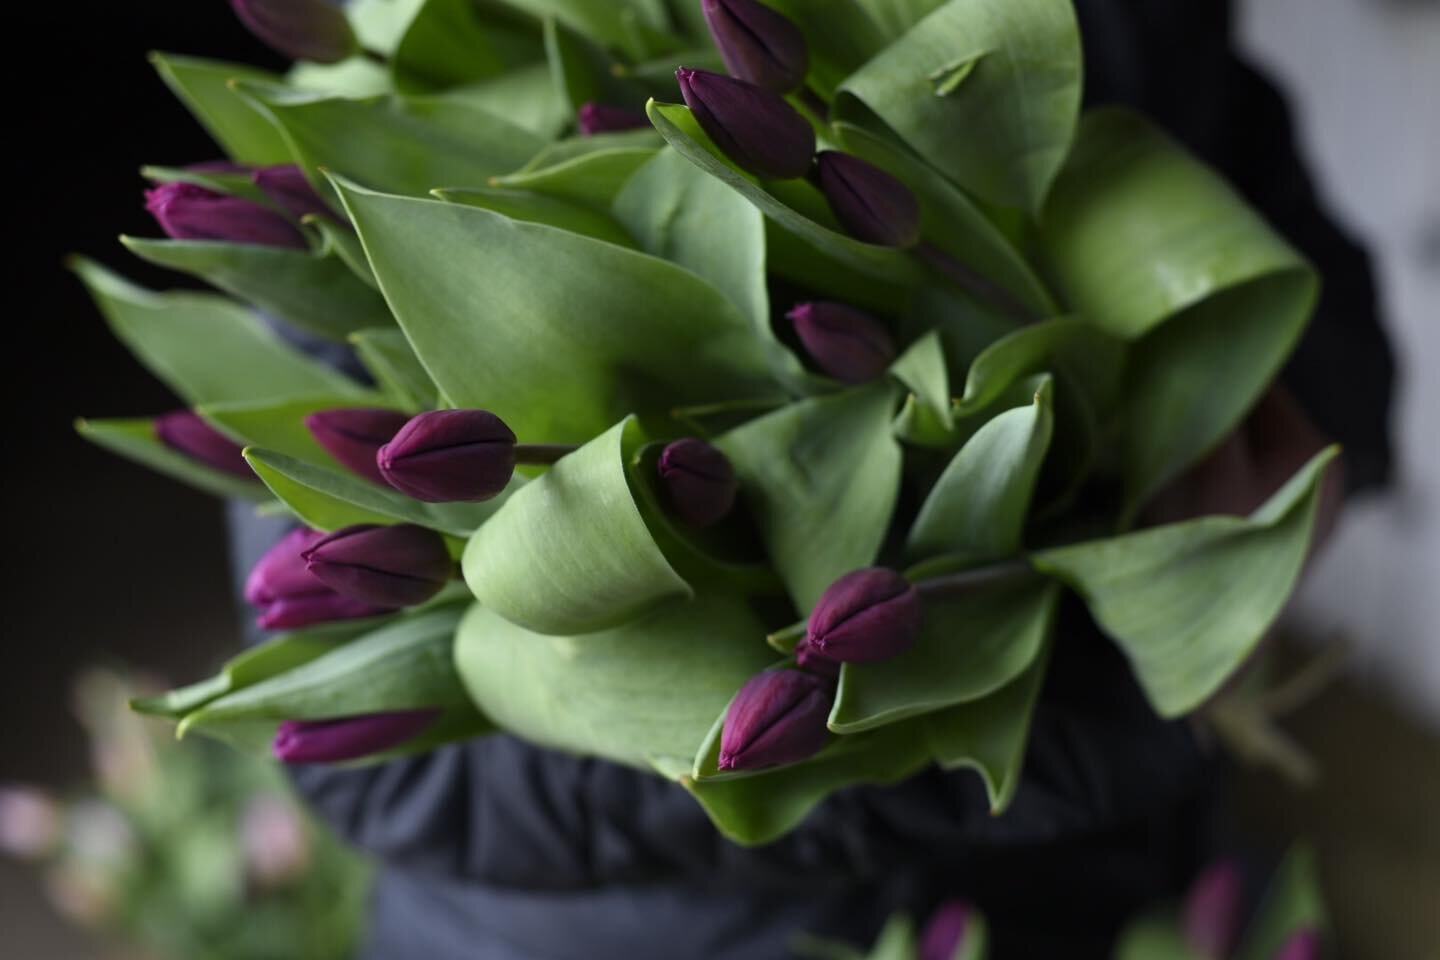 🍀With a wee bit of extra Irish luck today, our tulips have burst open! We are so excited for tulip season.

Cash and carry tulip $10 bundles are available in our farm stand today (Sunday). We are also taking tulip bouquet orders every day now. Order